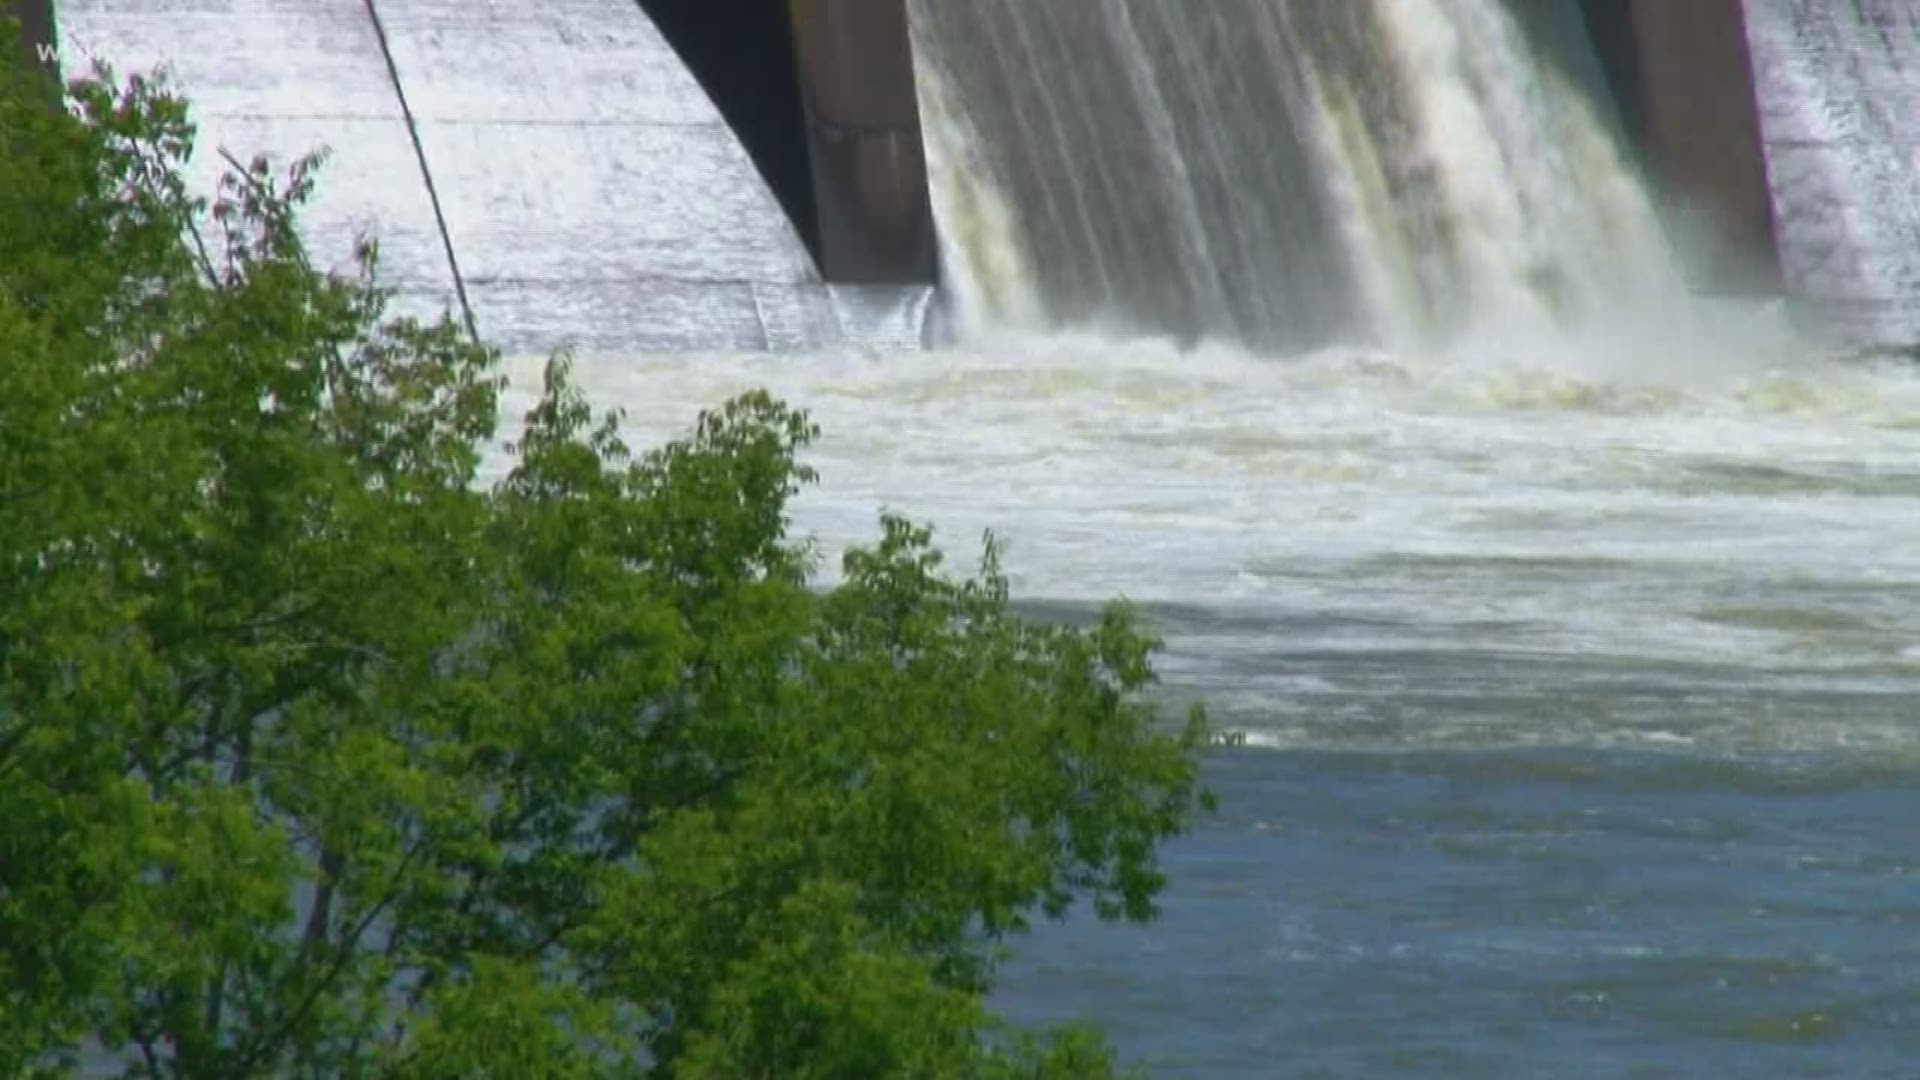 Signs warn boaters to stay away from the dam. The power of the rushing water could have serious, if not deadly, consequences just like we saw this past weekend. TVA says more than 485,000 gallons of water flow through the gates every second when they're o